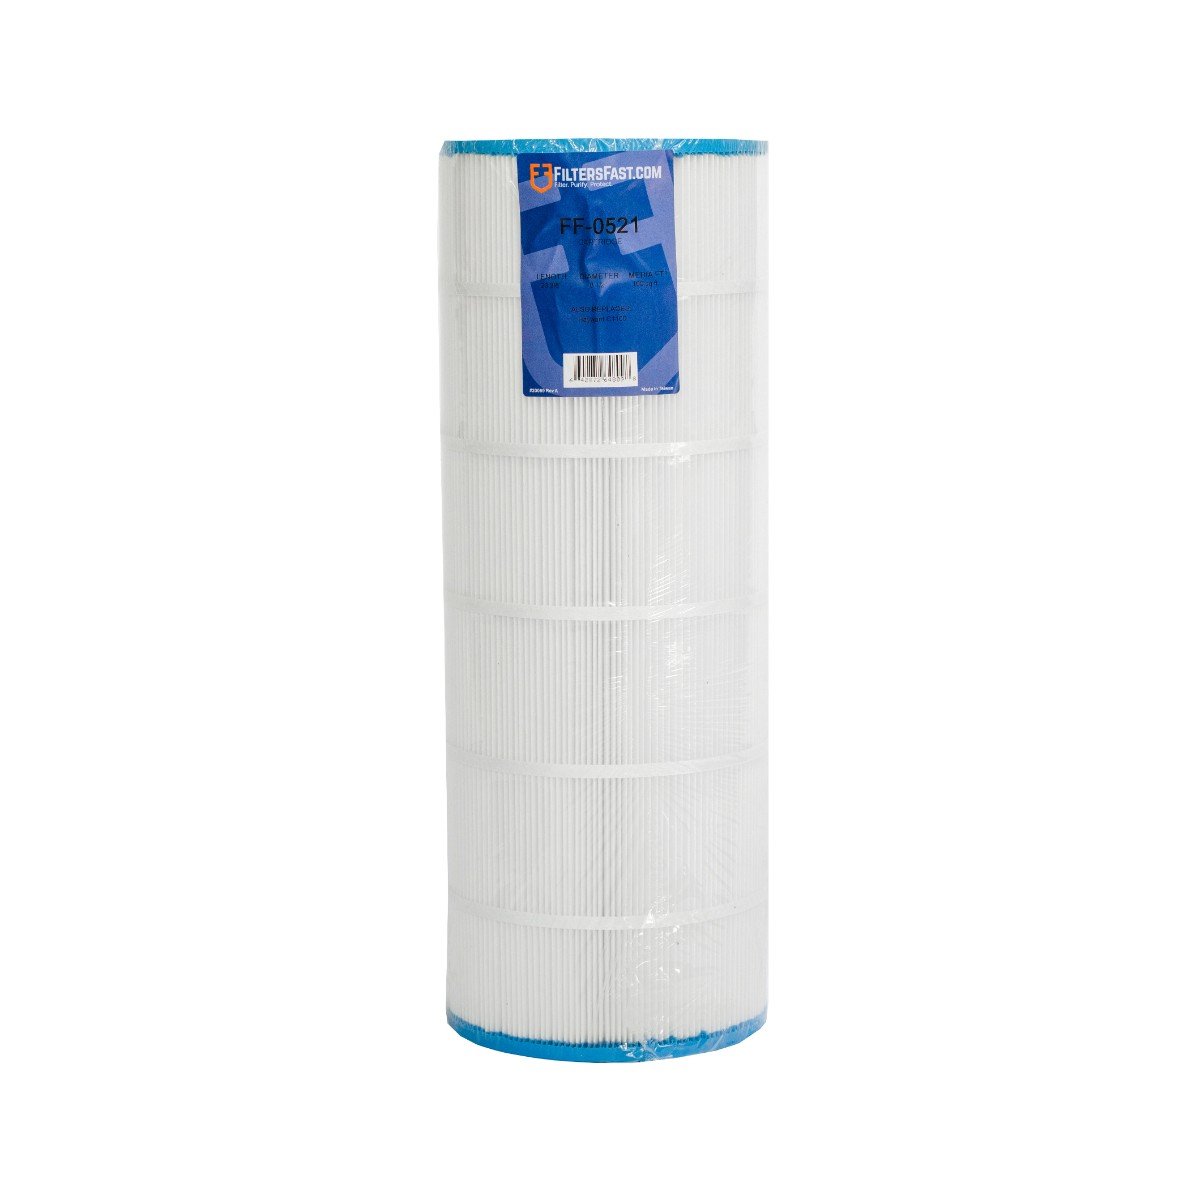 Filters Fast&reg; FF-0521 Replacement Pool & Spa Filter Cartridge